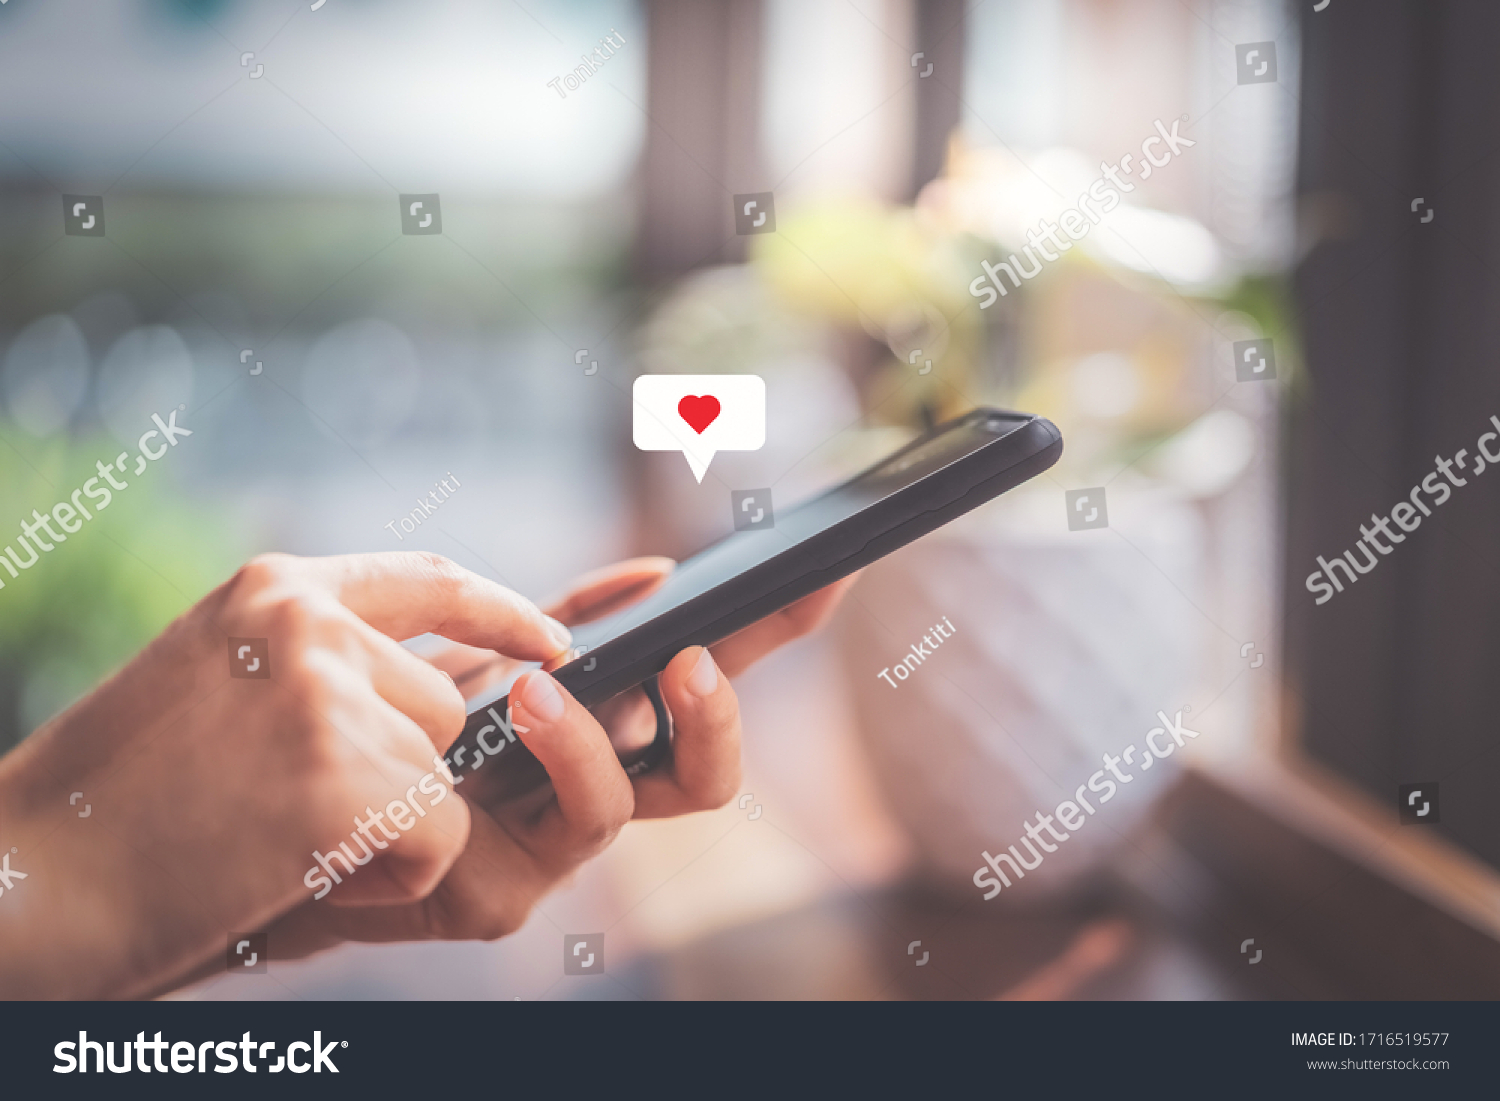 Woman hand using smartphone with heart icon at coffee shop background. Technology business and social lifestyle concept. Vintage tone filter effect color style. #1716519577